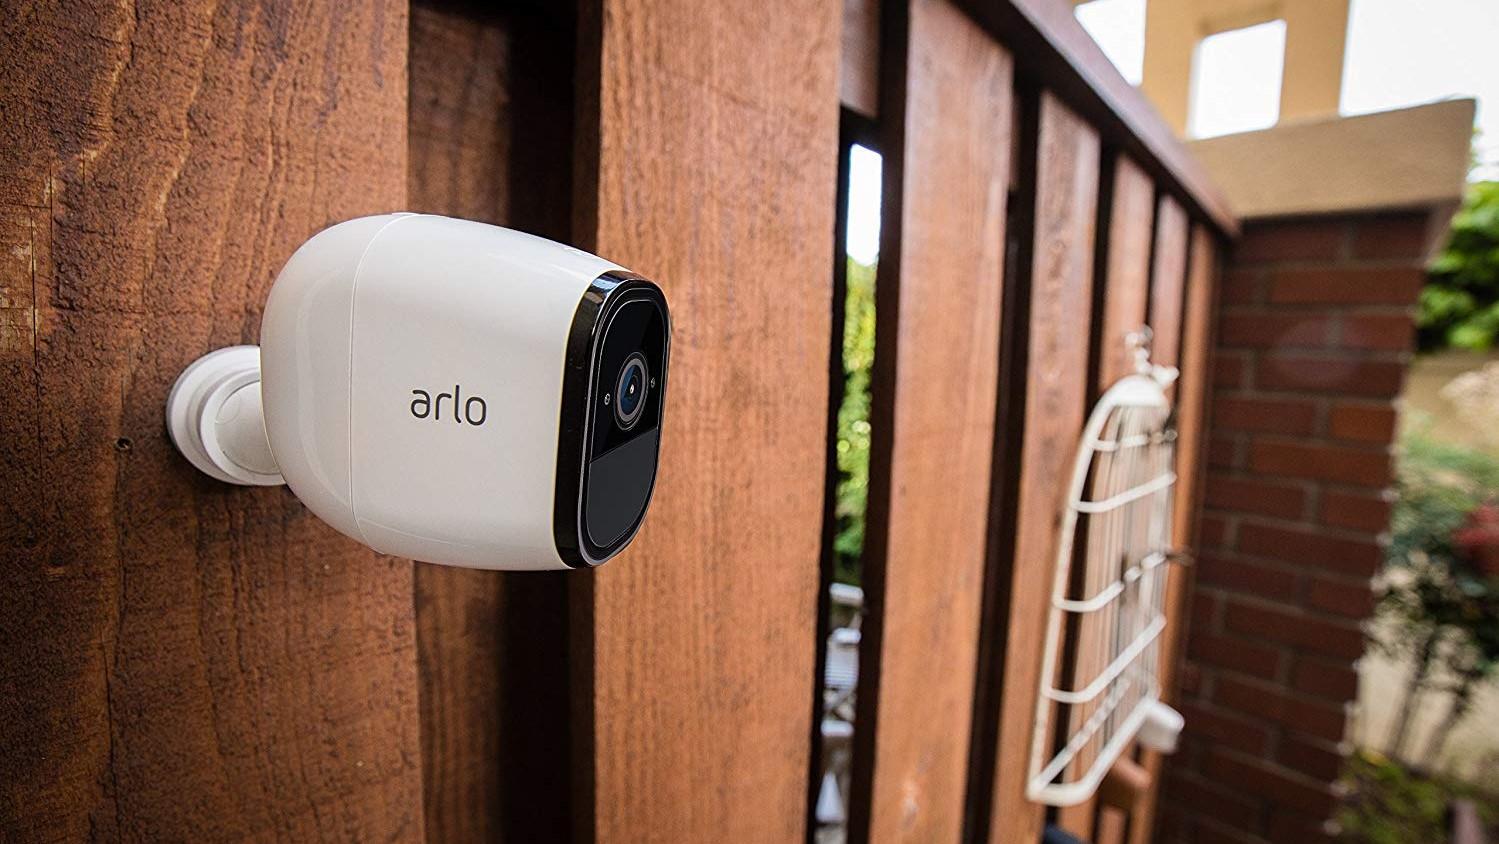 The Arlo Pro security camera attached to a wall.